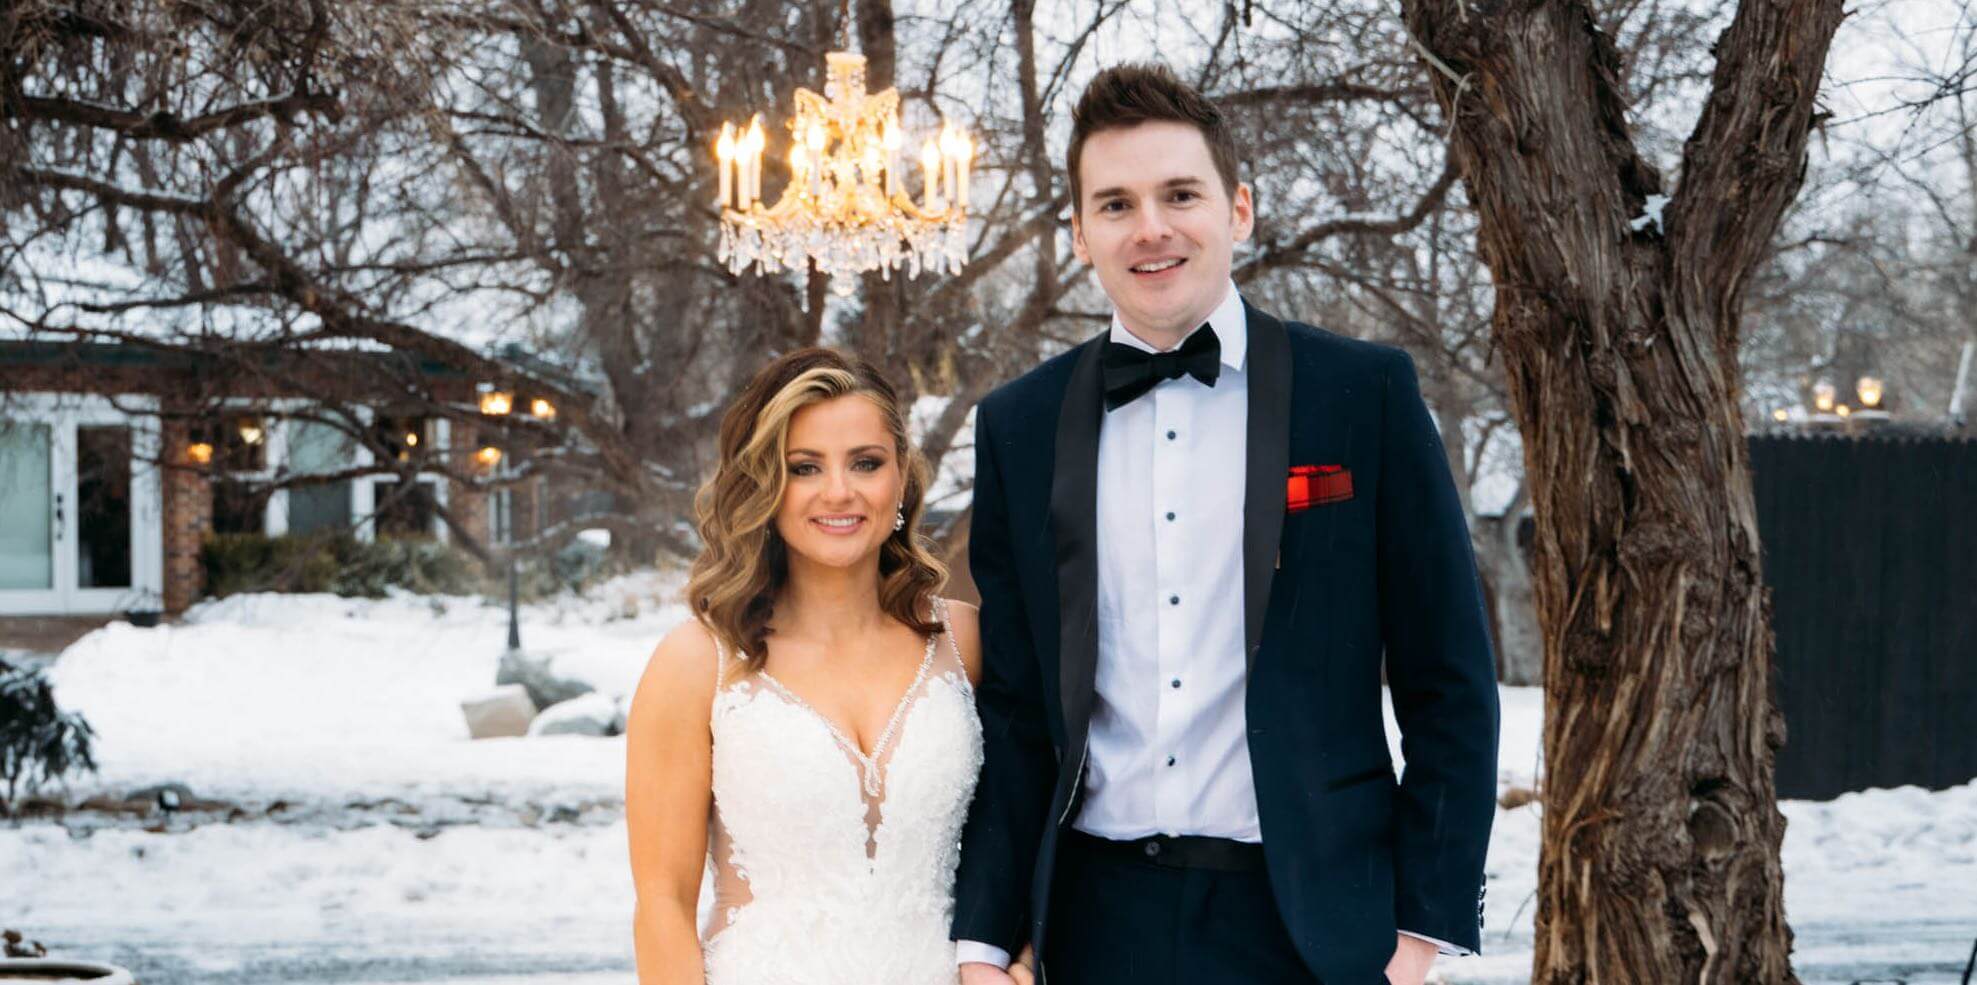 'Married at First Sight' Season 17 cast members Clare and Cameron on their wedding day